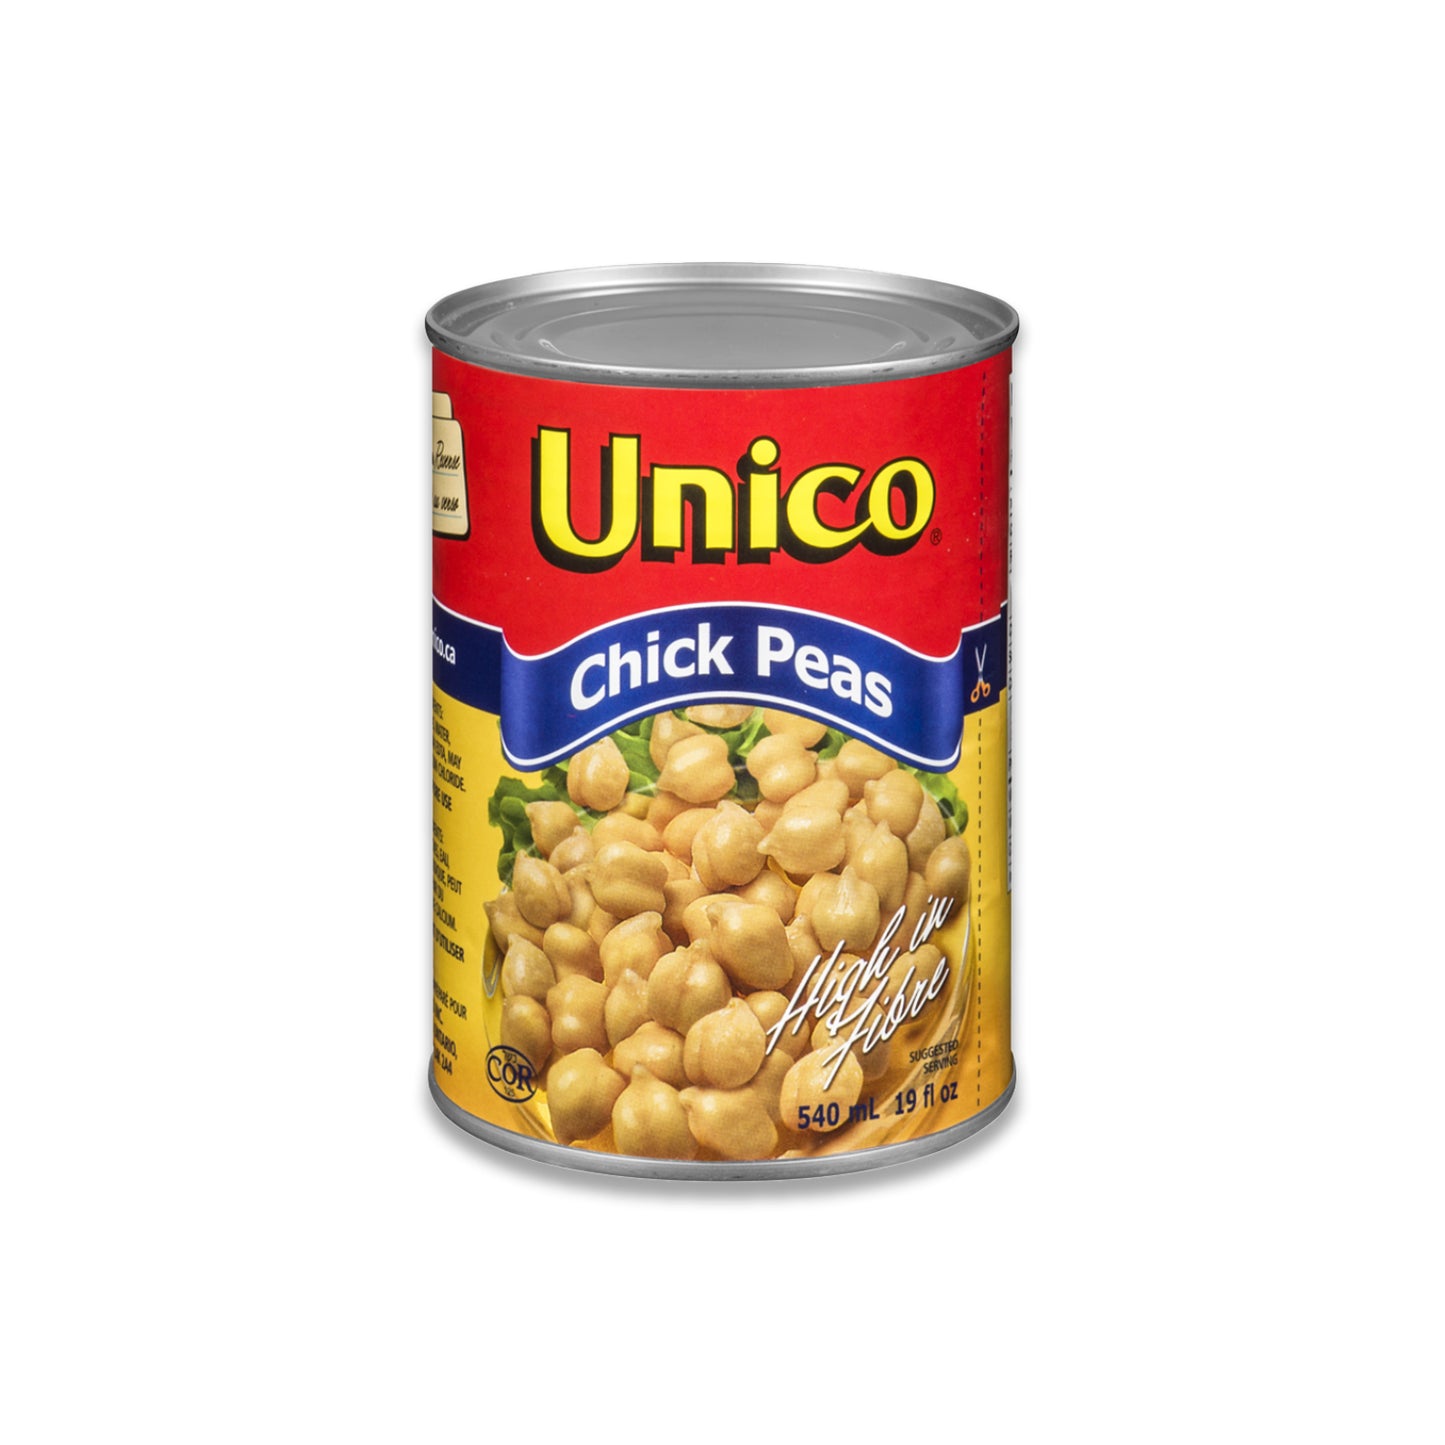 Canned Chickpeas - Unico